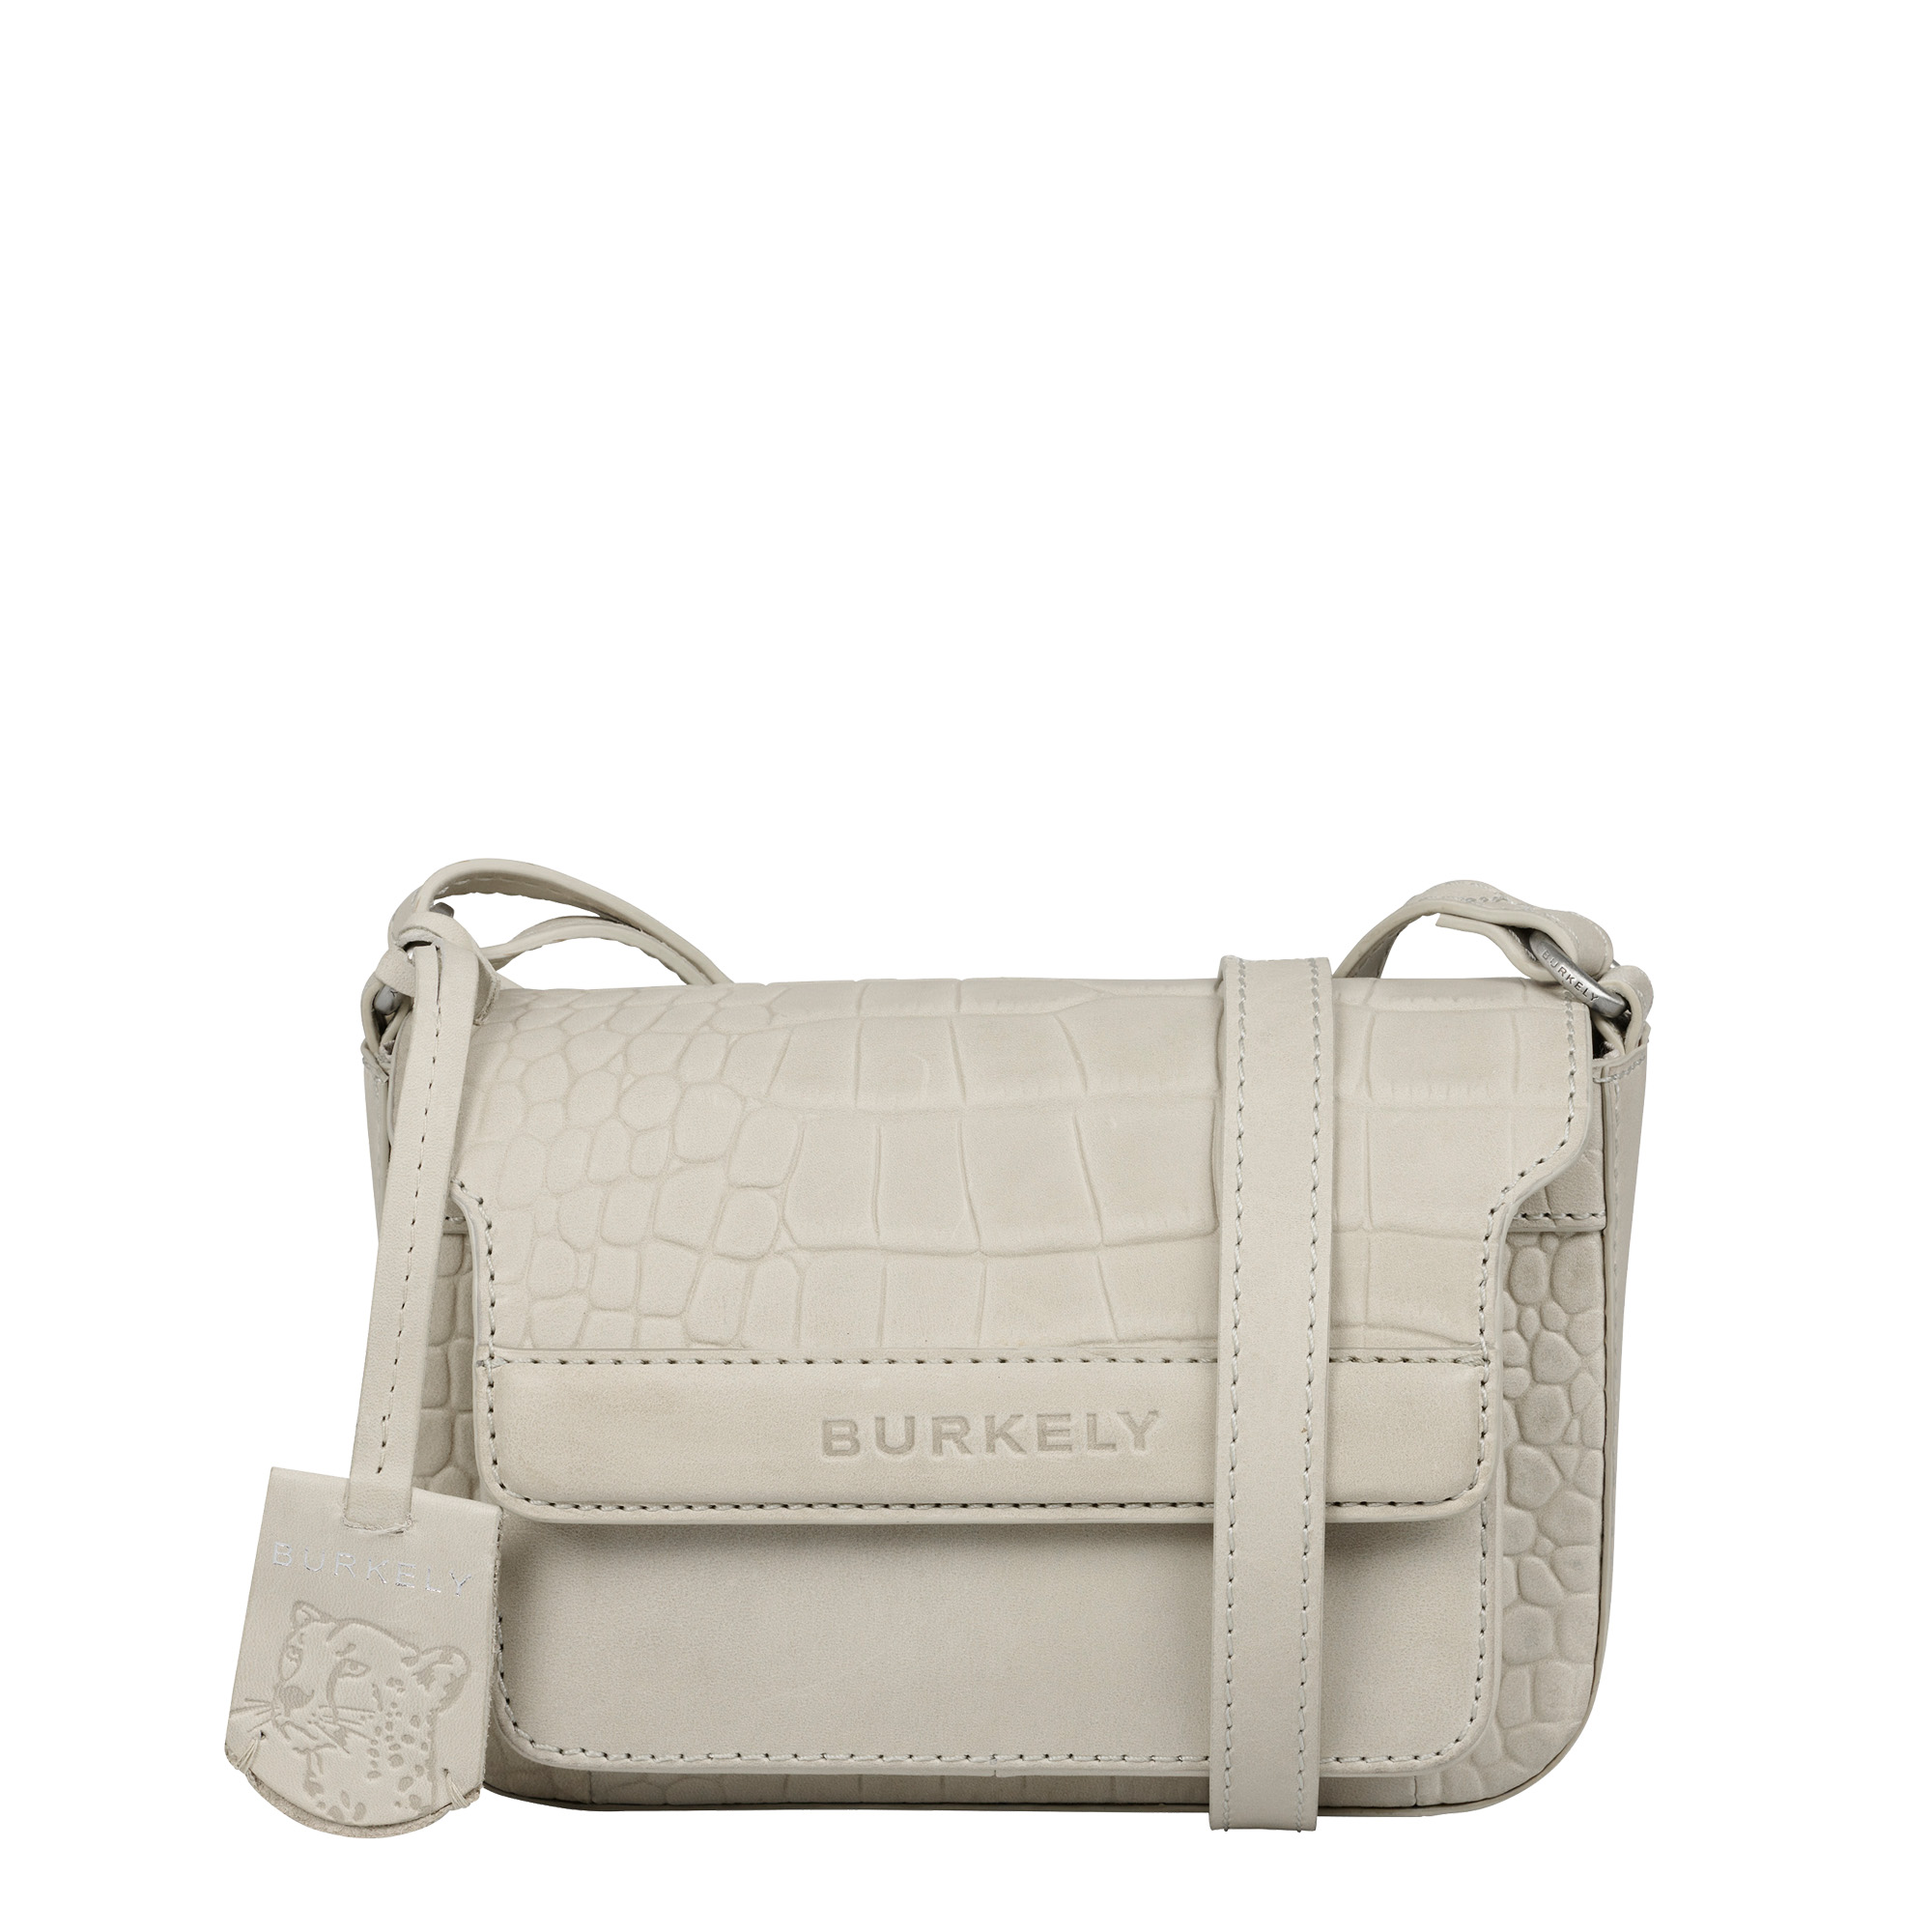 BURKELY CASUAL CAYLA SATCHEL SMALL